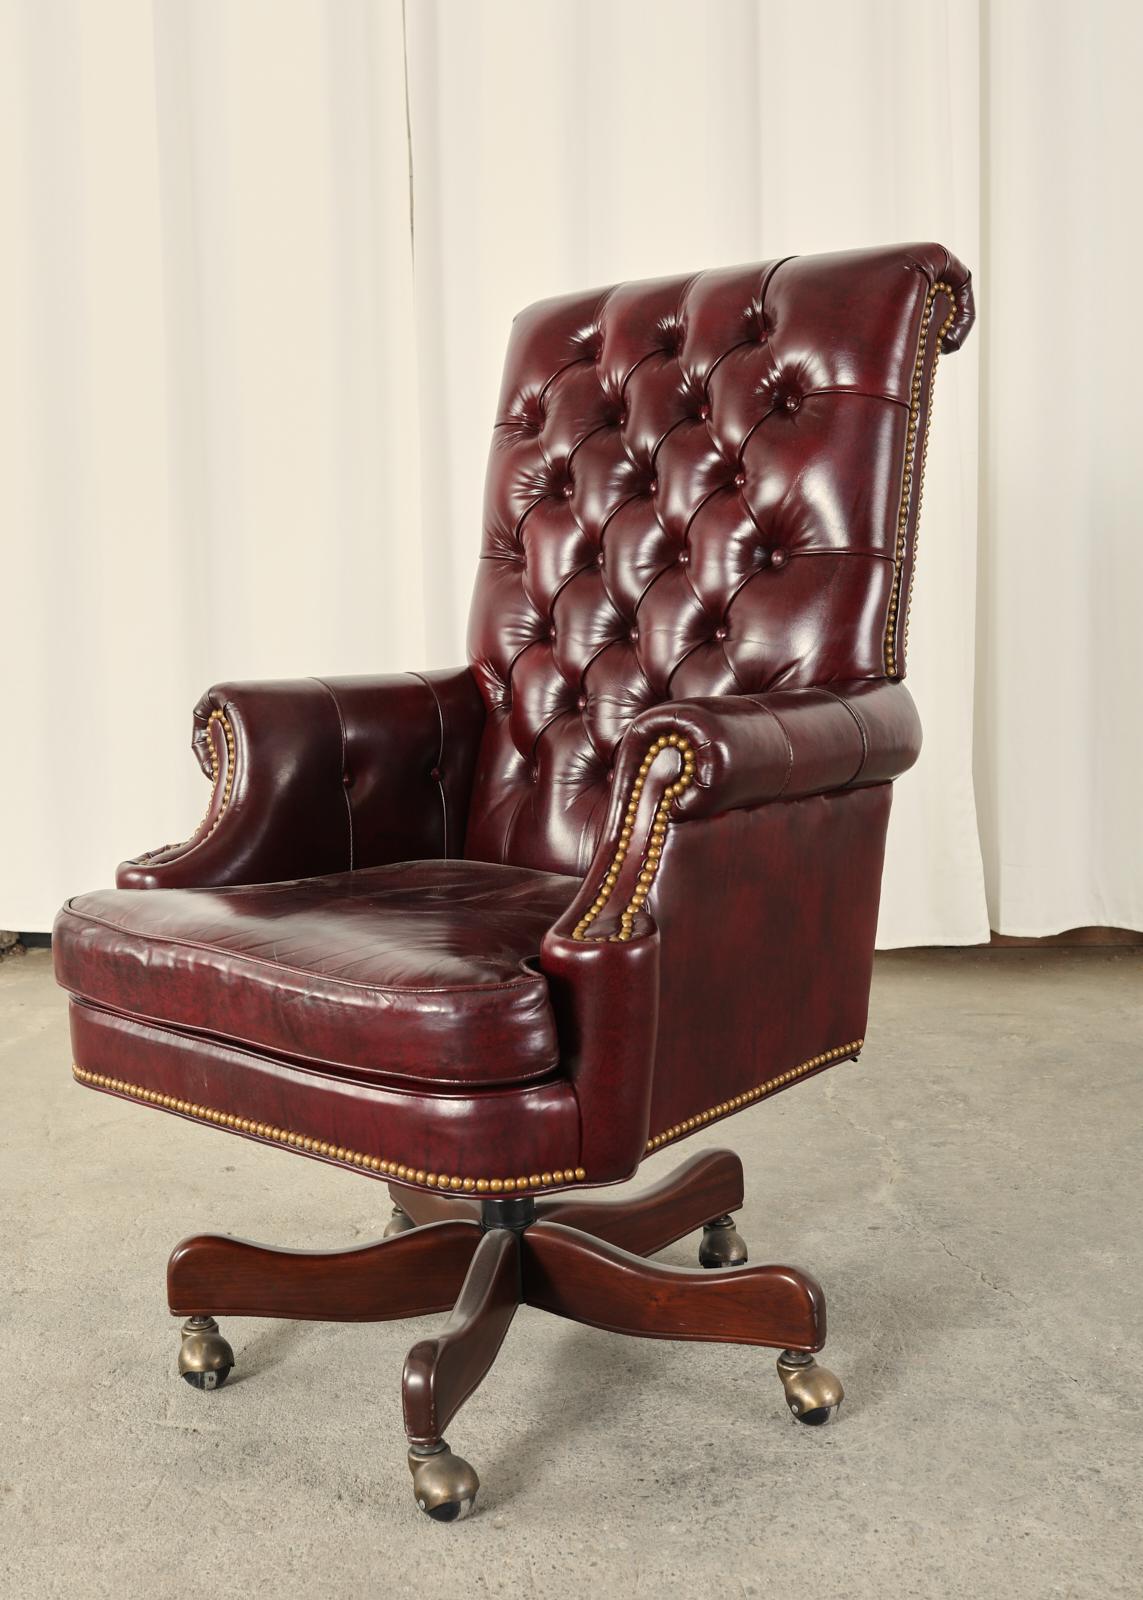 Hand-Crafted English Chesterfield Style Tufted Leather Executive Desk Chair